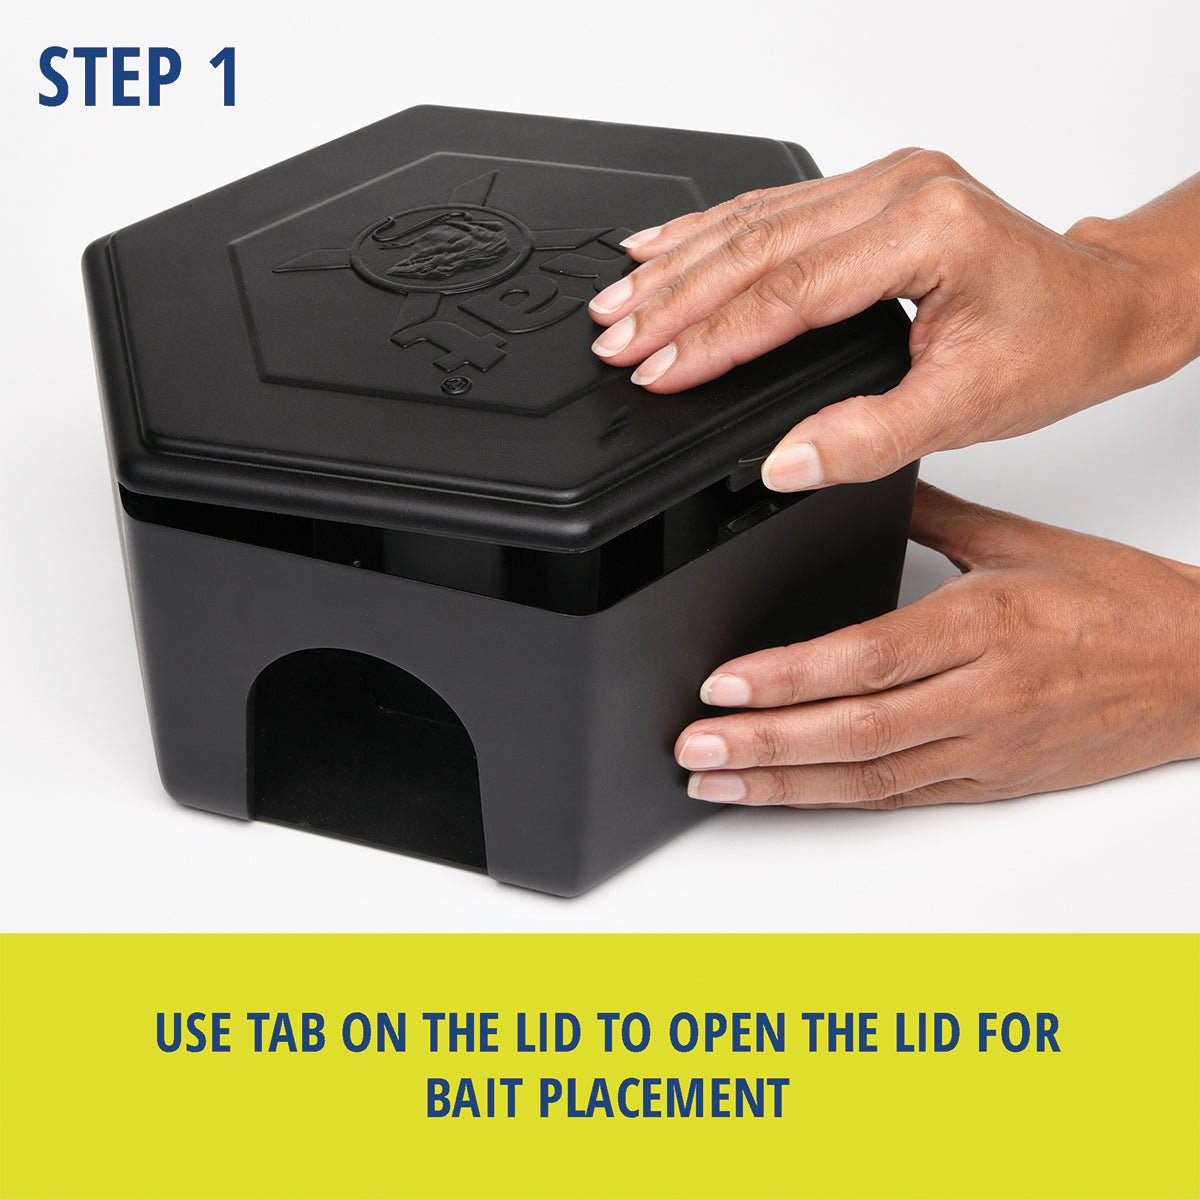 RatX® Small Bait Box. Step 1: Use tab on the lid to open the lid for bait placement